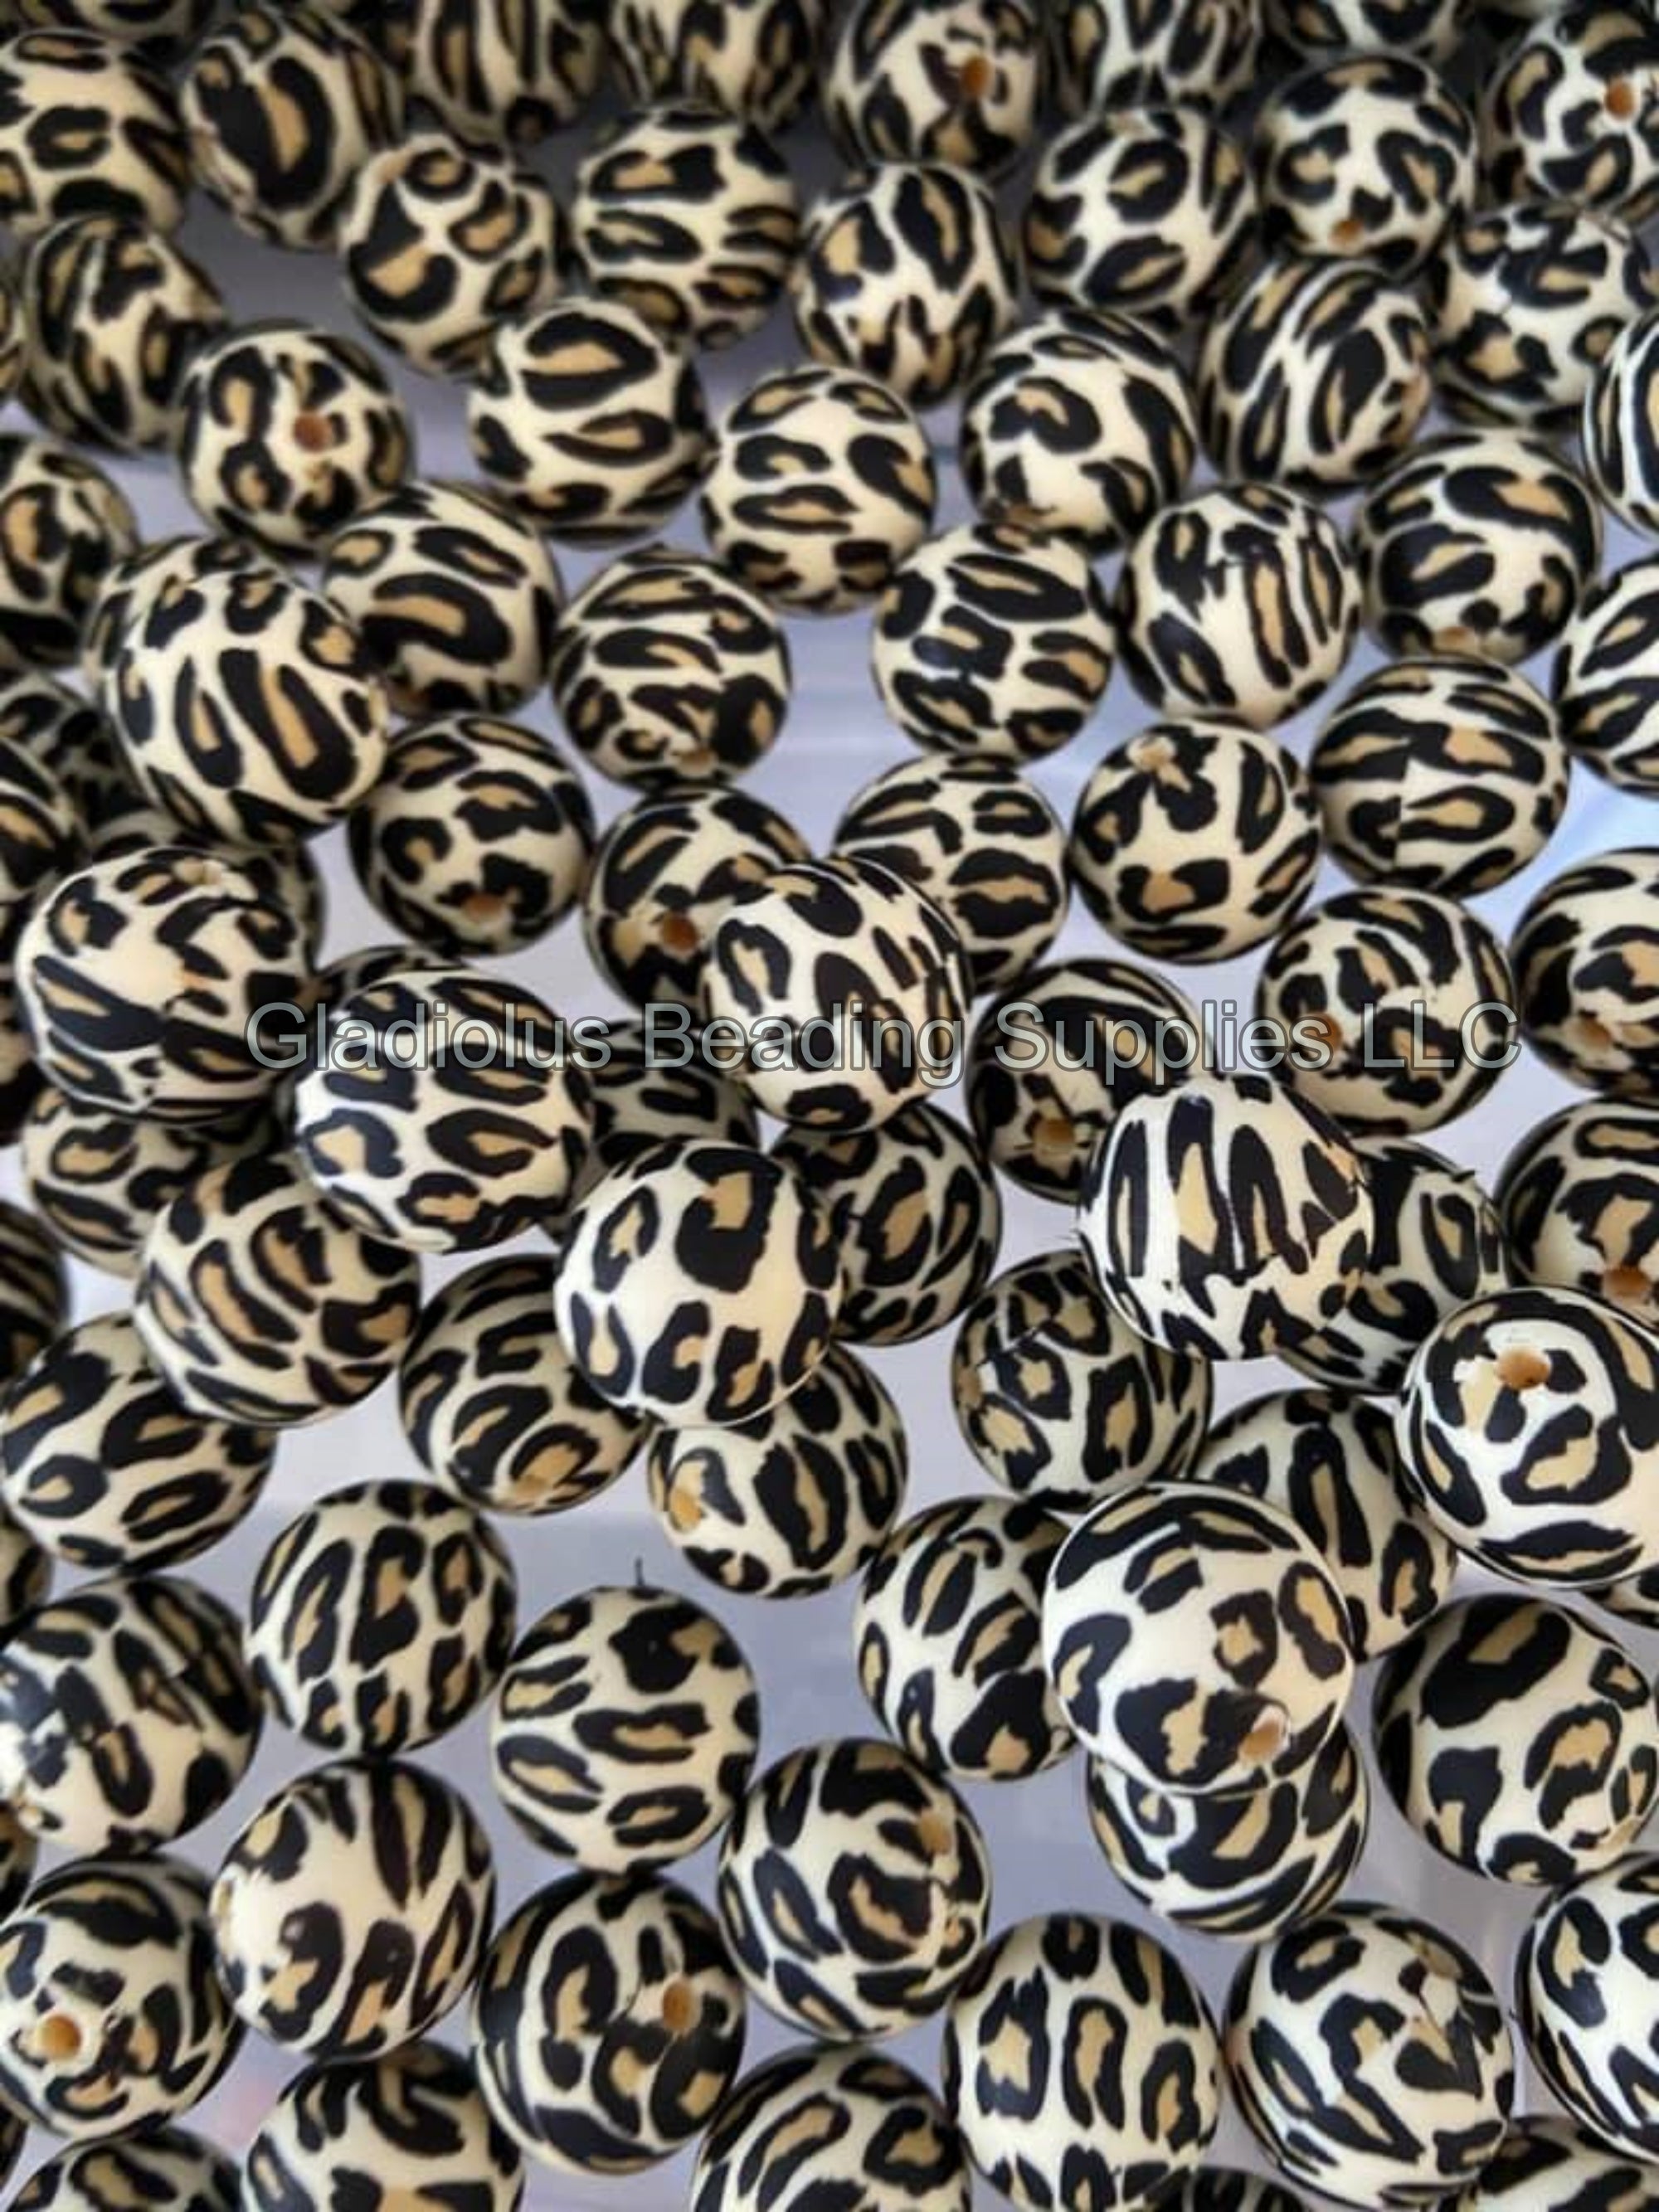 121Pcs 12/15mm Leopard Cow Print Silicone Round Beads For Jewelry Making  DIY Fashion Unique Bracelet Necklace Key Bag Chain Handmade Craft Supplies